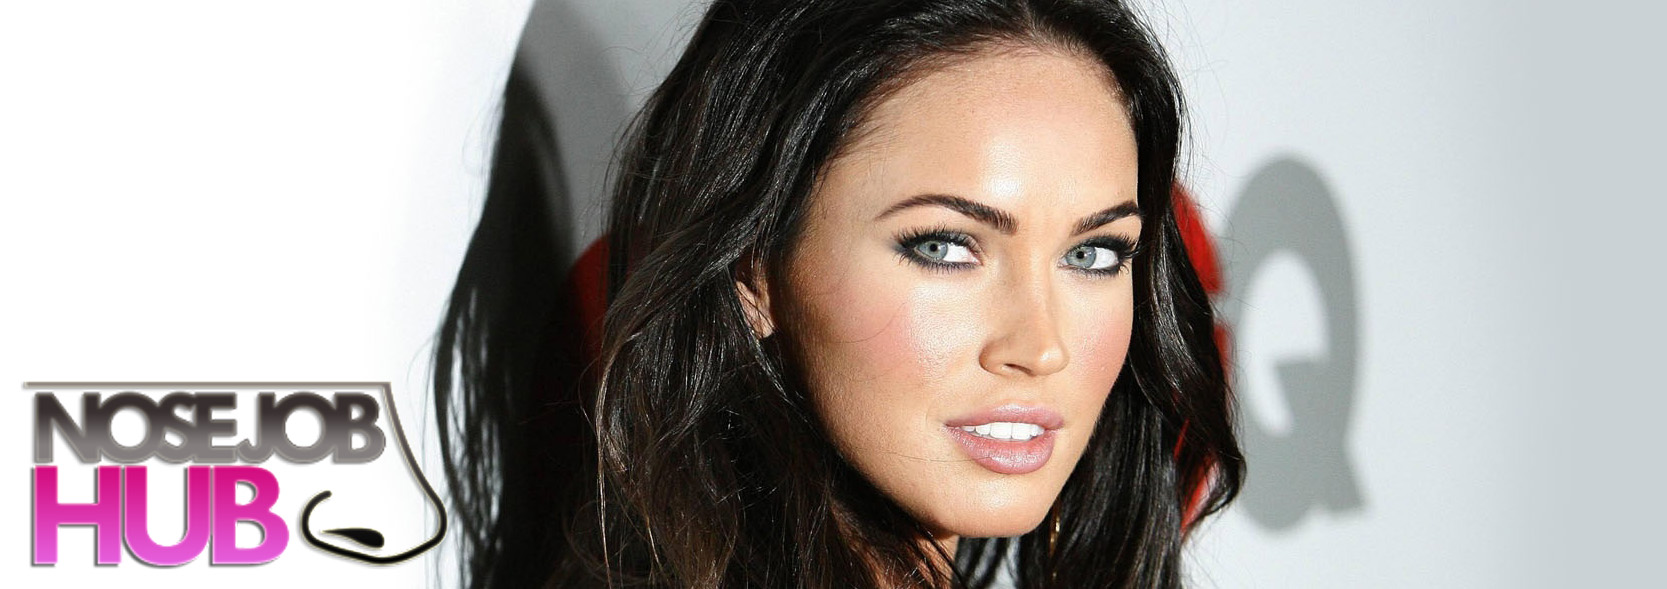 Megan Fox Before and After Nose Job